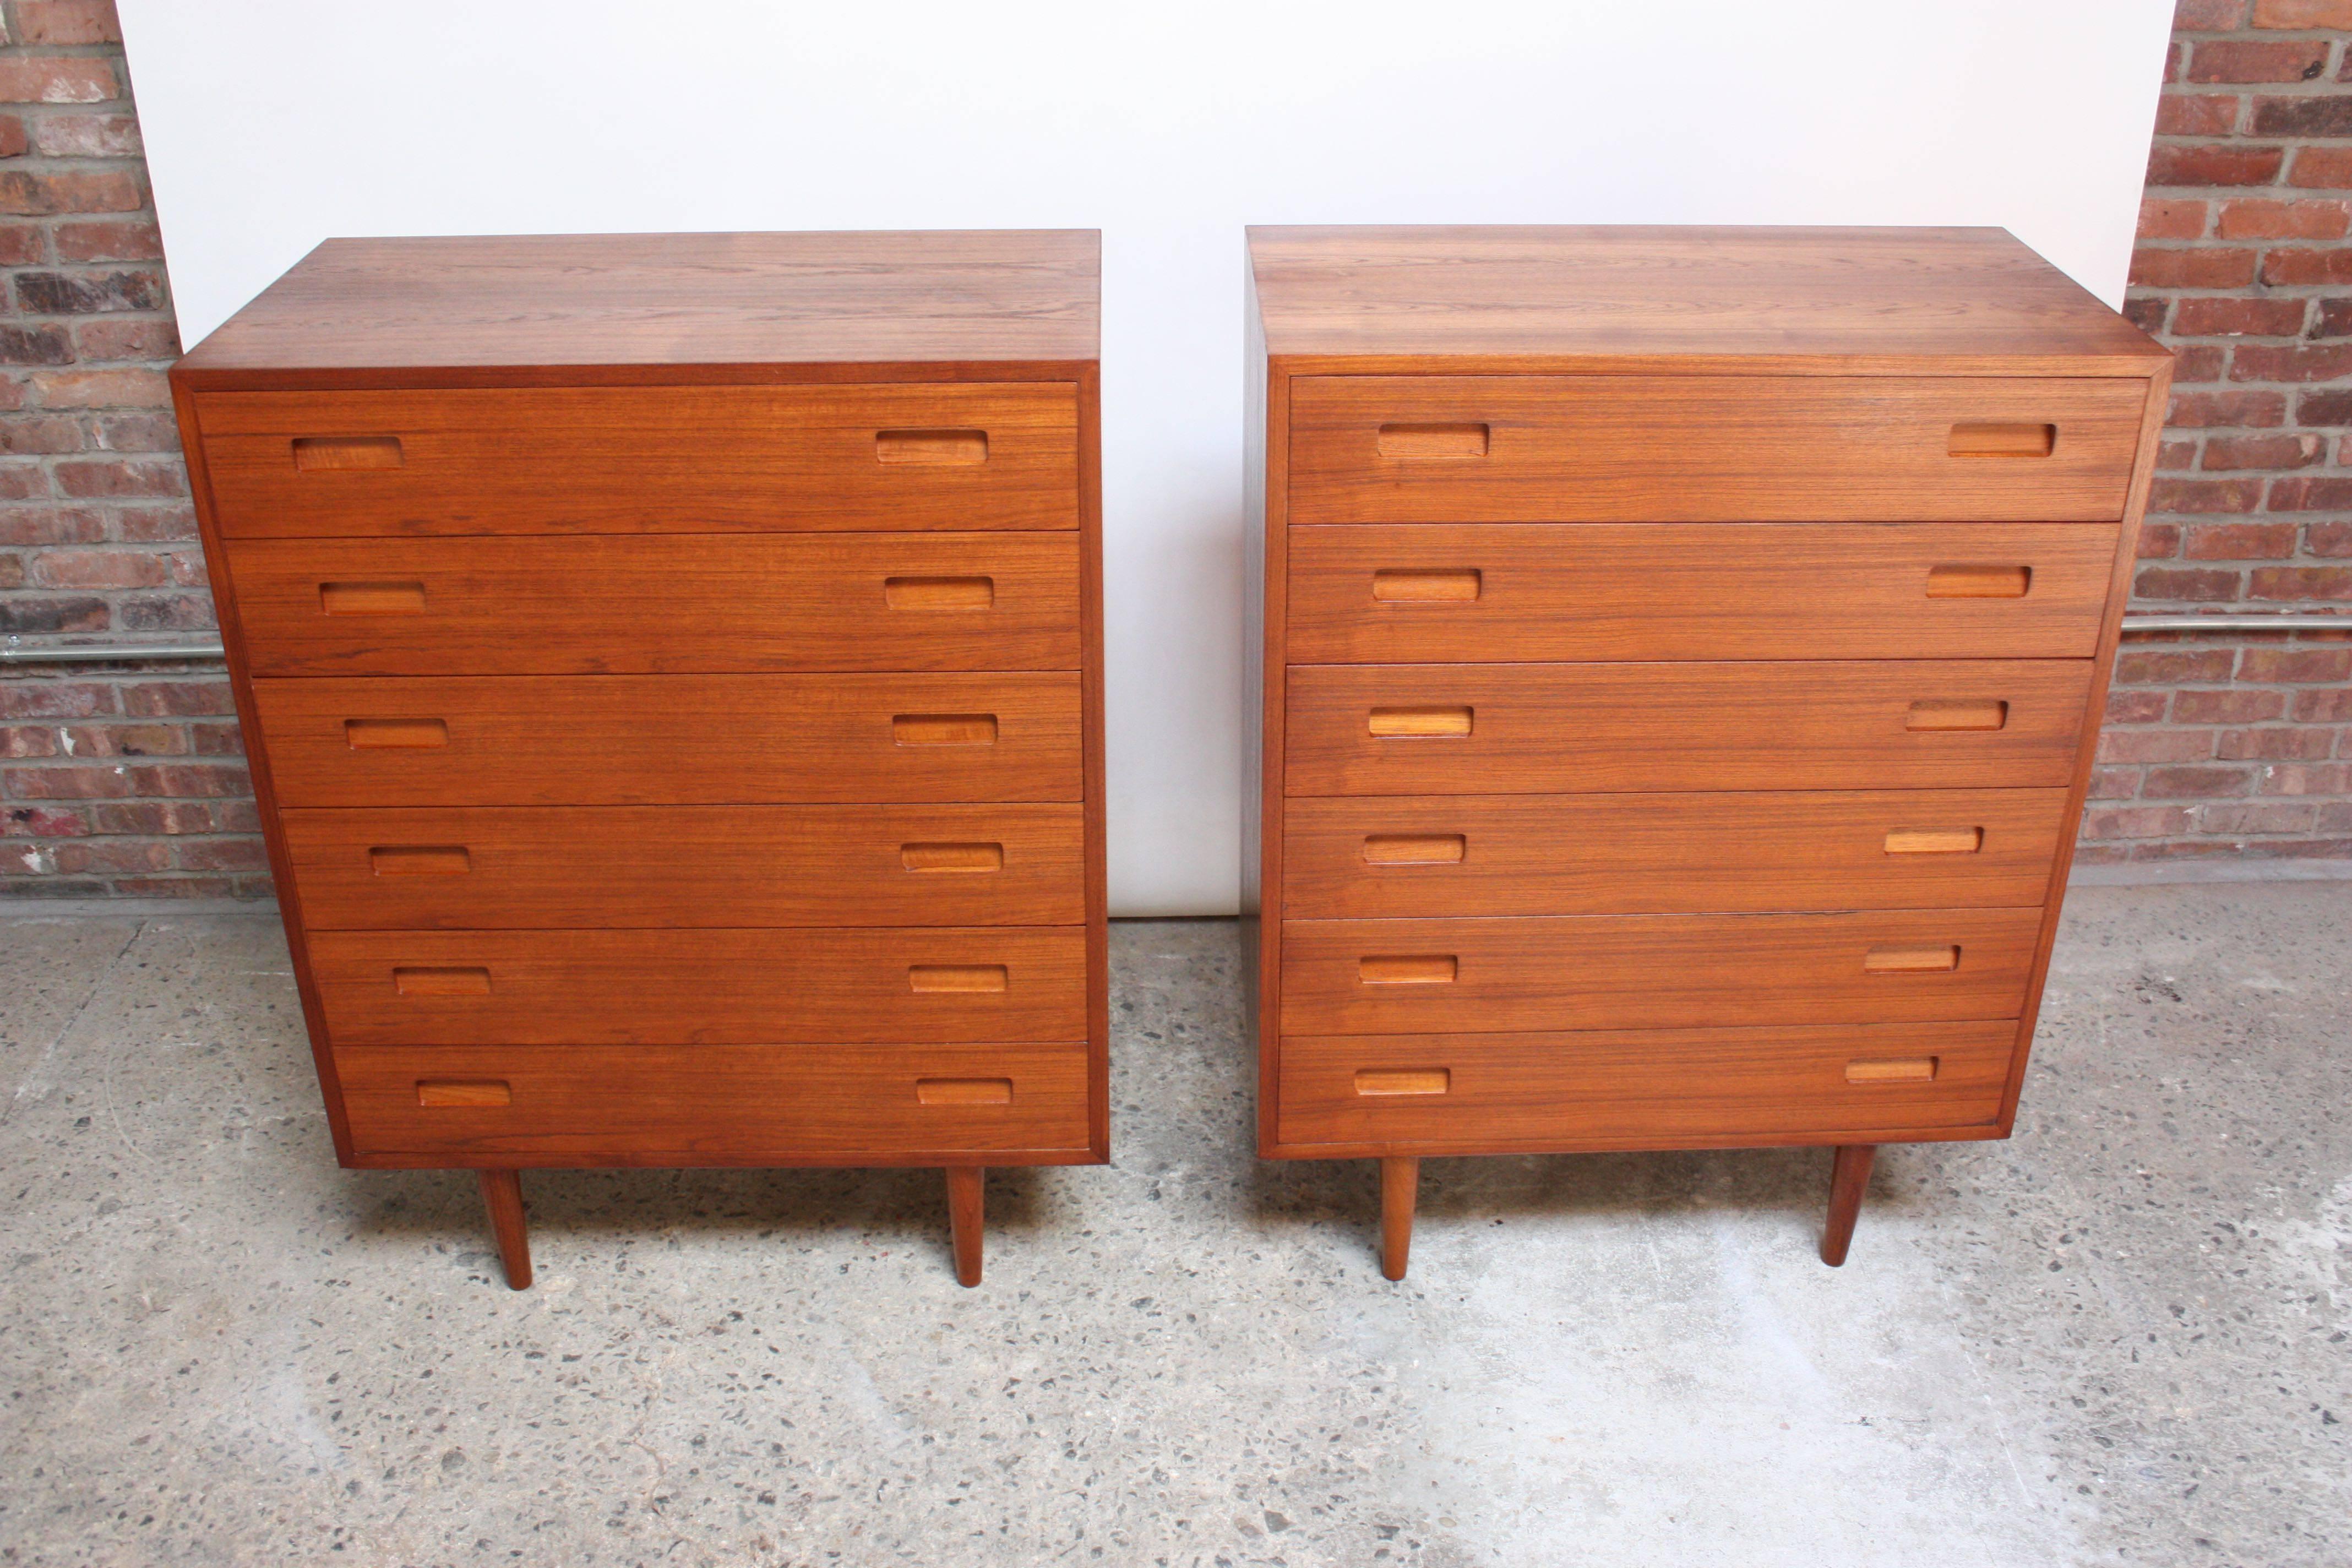 This pair of Poul Hundevad minimal teak 'Bachlelor' chests boasts clean lines and vivid book-matched teak grain. Each drawer (six / chest) has carved, recessed pulls, and the drawers open effortlessly. Chests are supported by solid teak turned